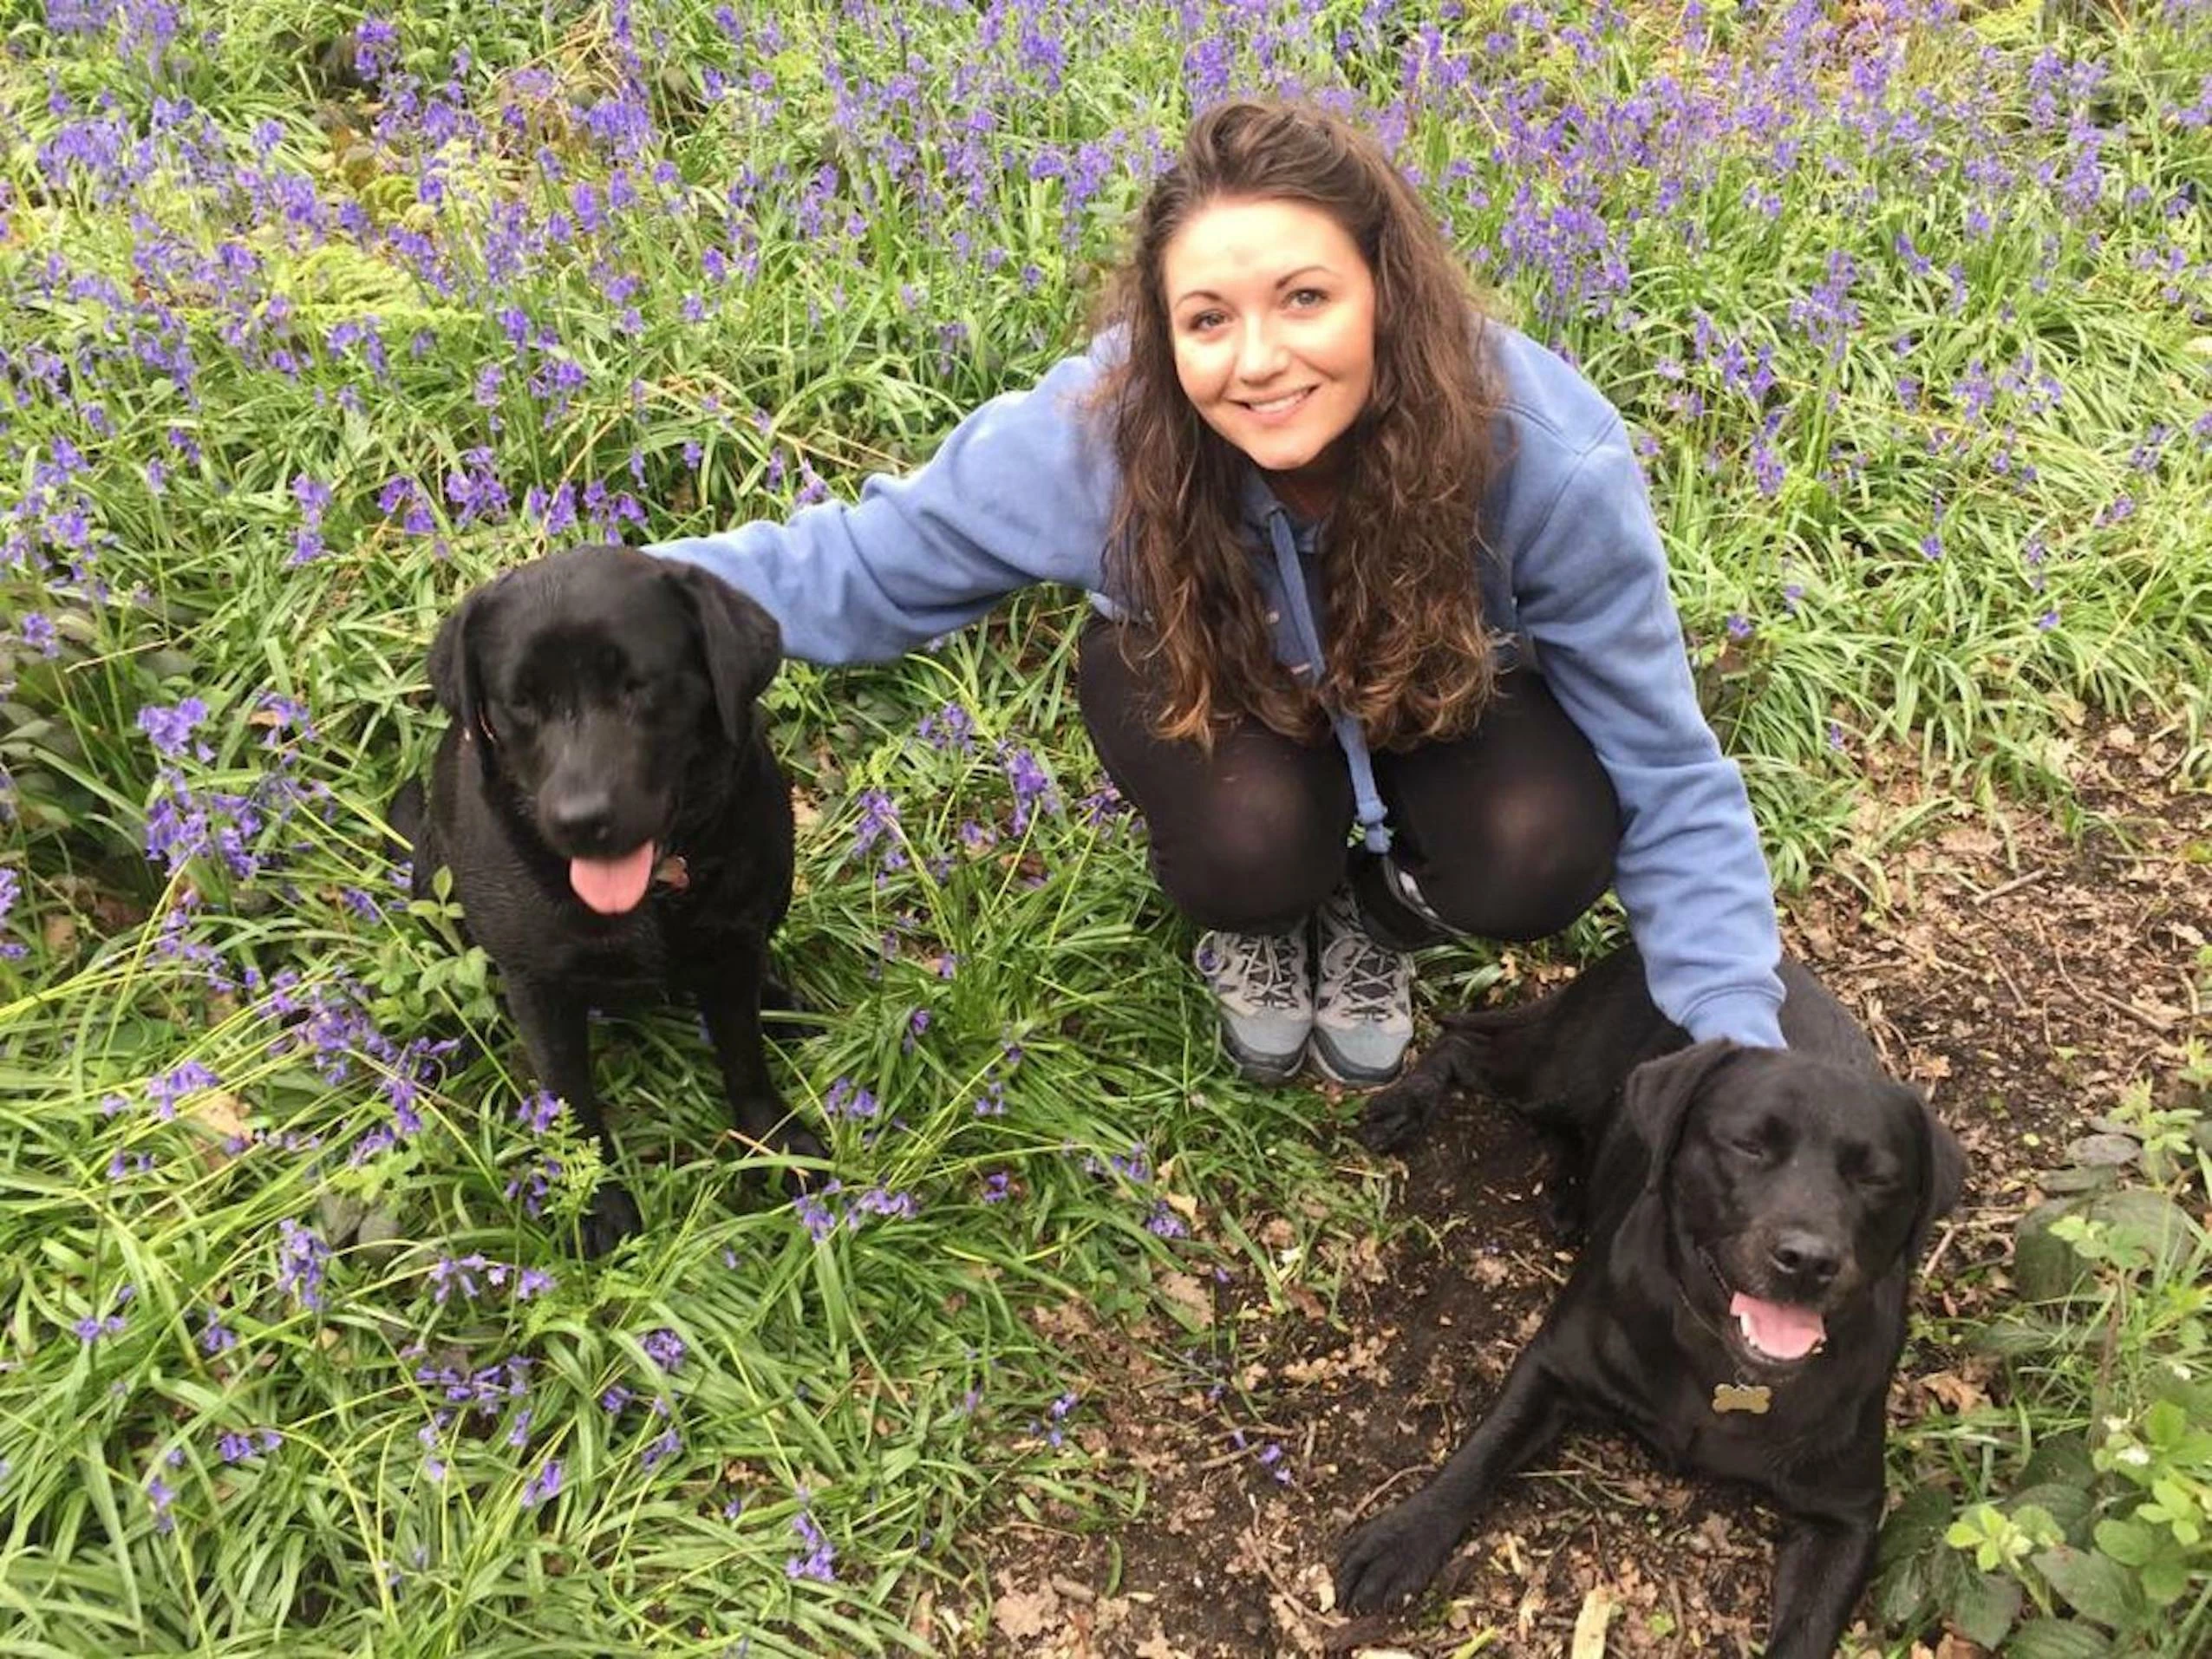 Pet interior brand Olive & Berry has launched a new crowdfunding campaign to help grow the business and donate essential items to homeless charities in the North this winter